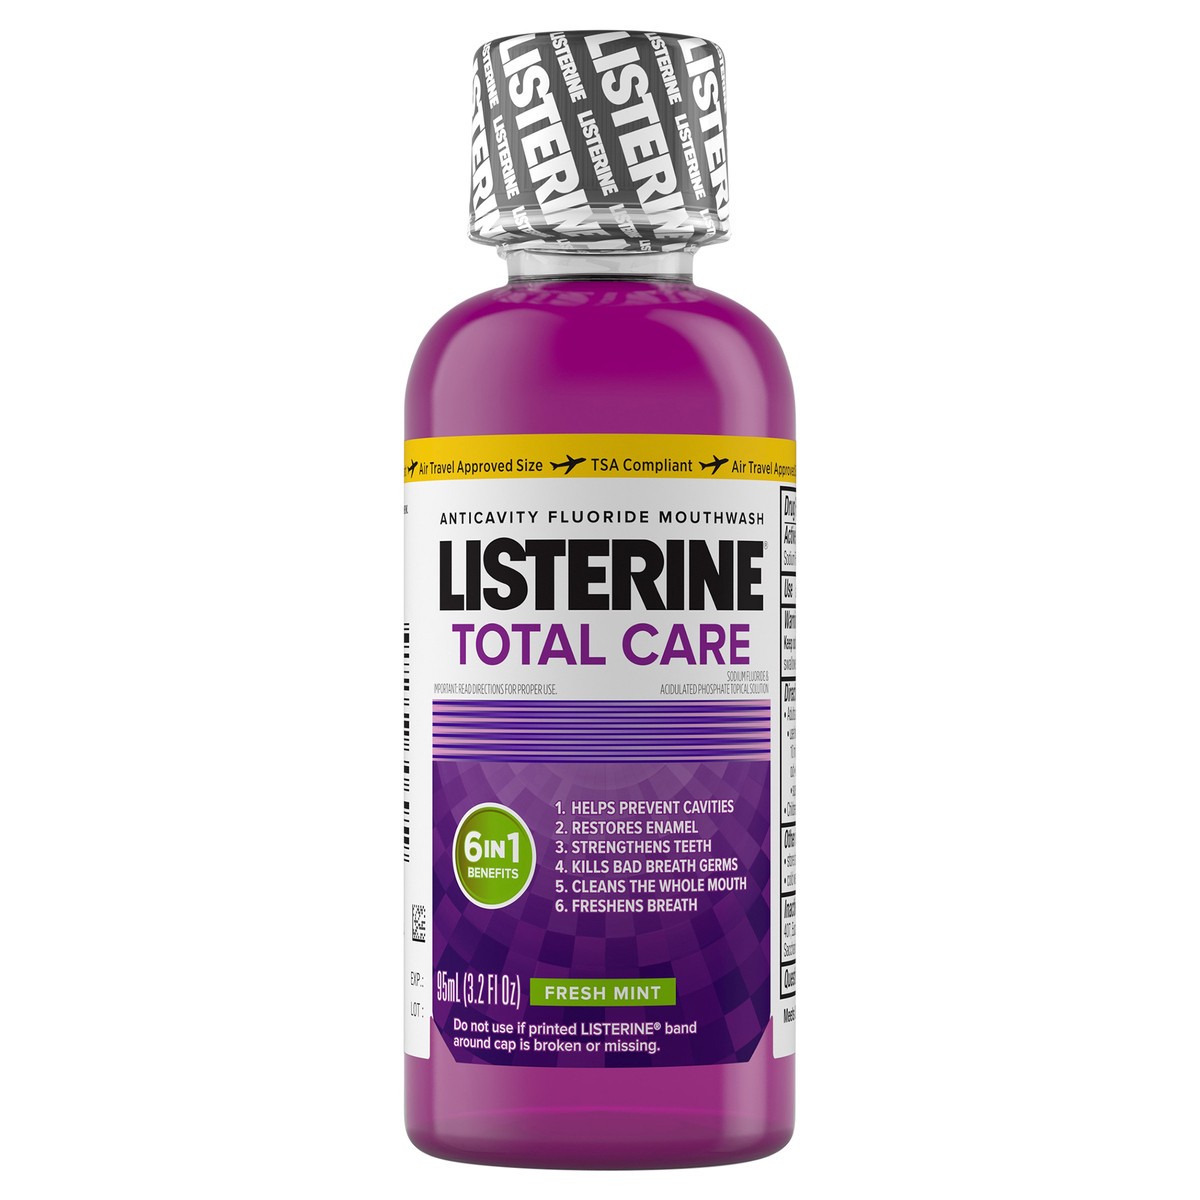 slide 1 of 11, Listerine Total Care Anticavity Fluoride Mouthwash, 6 Benefit Oral Rinse Kills 99% of Bad Breath Germs, Prevents Cavities, Strengthens Enamel, ADA-Accepted, Fresh Mint, Travel Size, 95 mL, 95 ml